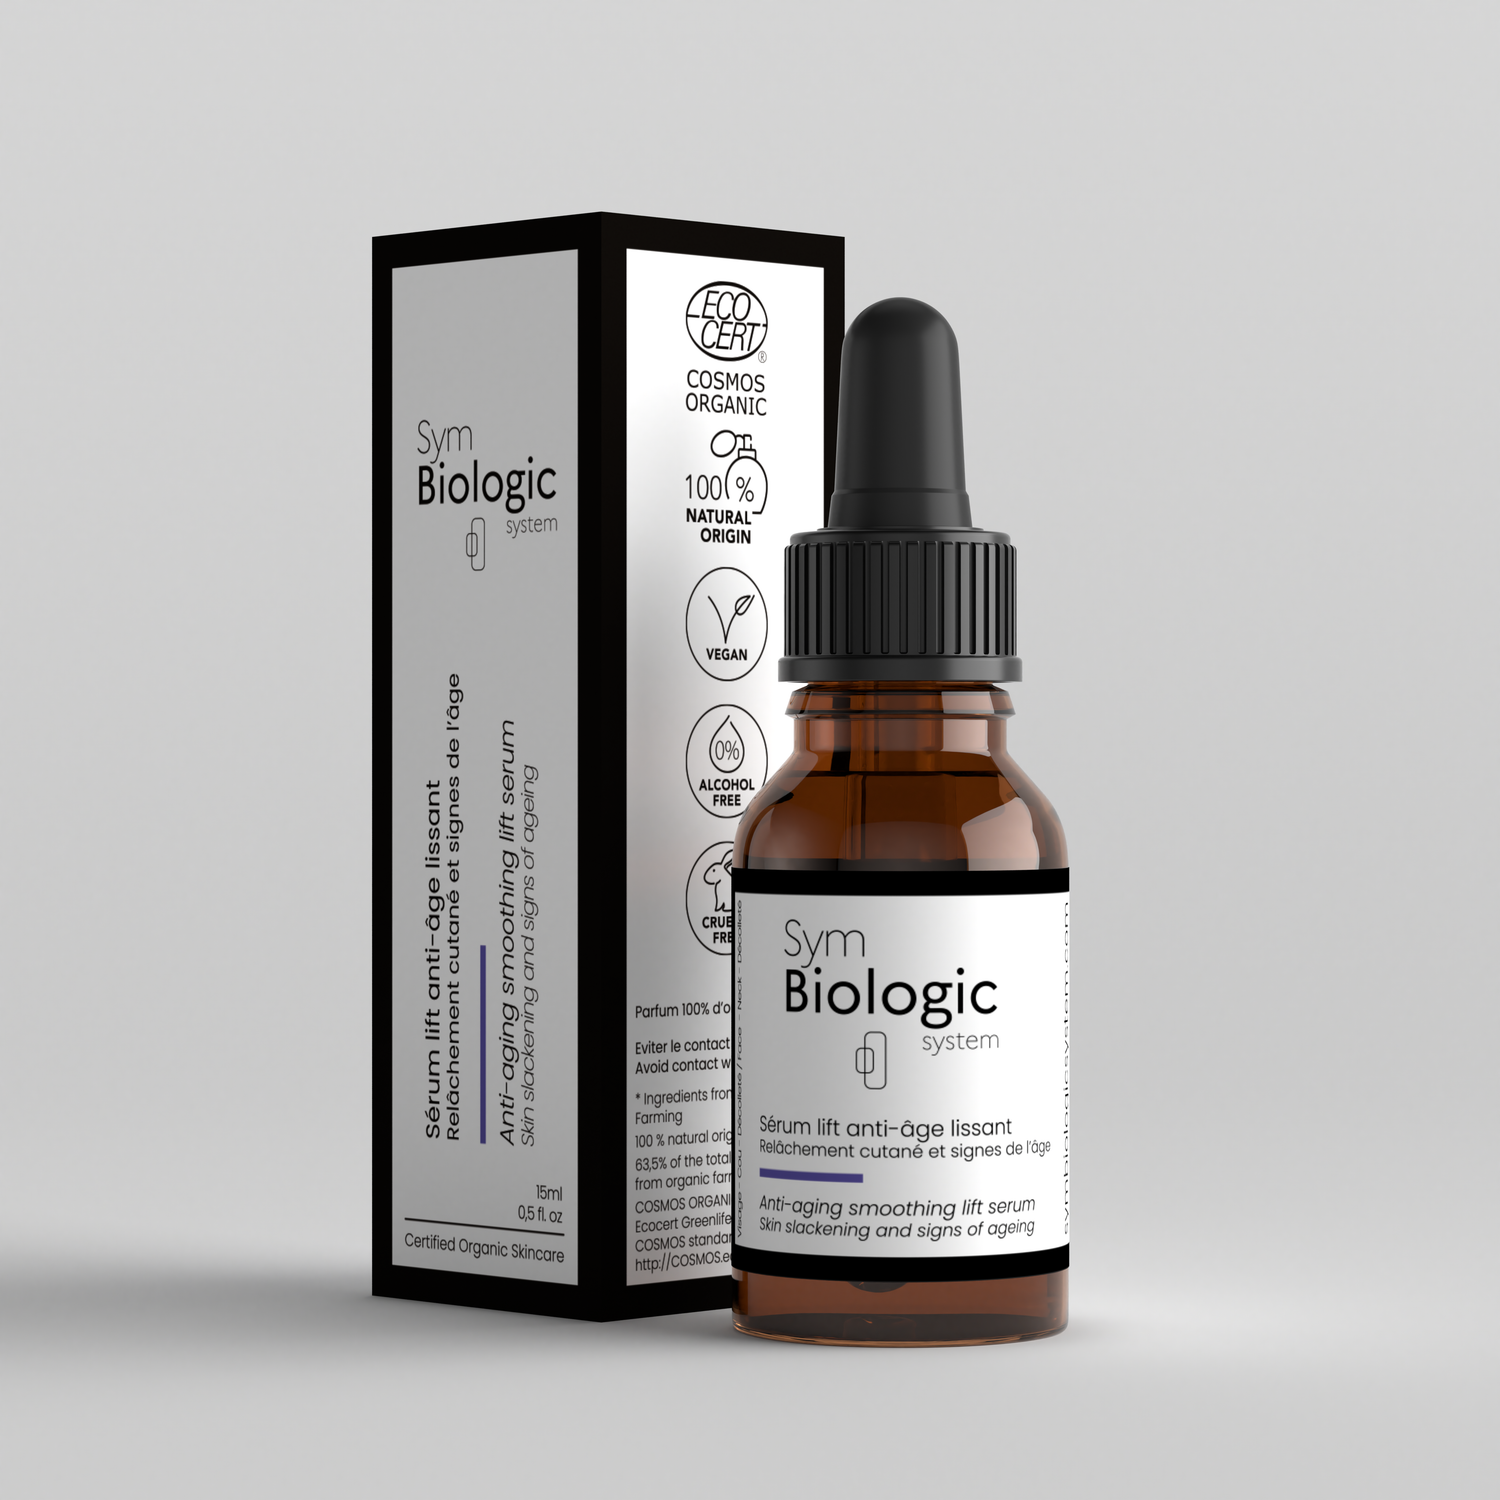 Anti-Aging Smoothing Lift Serum in a 15ml glass dropper bottle with its box on a white background, for firming and smoothing.